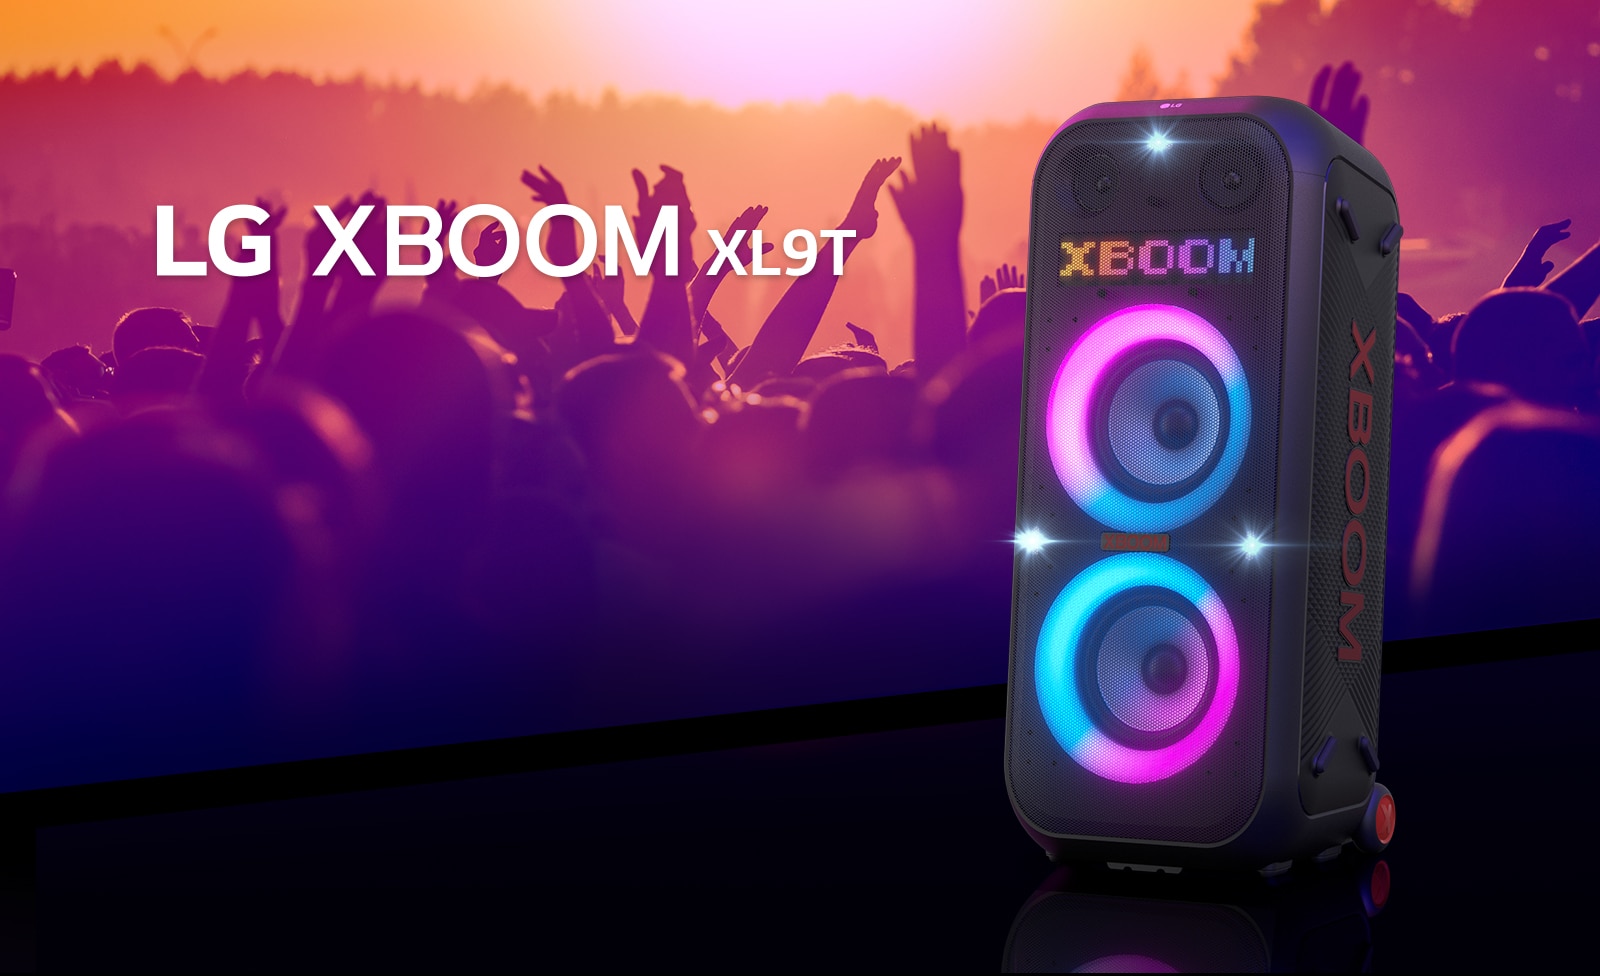 LG XBOOM XL9T is placed on the surface with diagonal view. Multi-color lighting on, and the display shows the word "XBOOM". Behind the speaker, shillouette of people enjoying party.